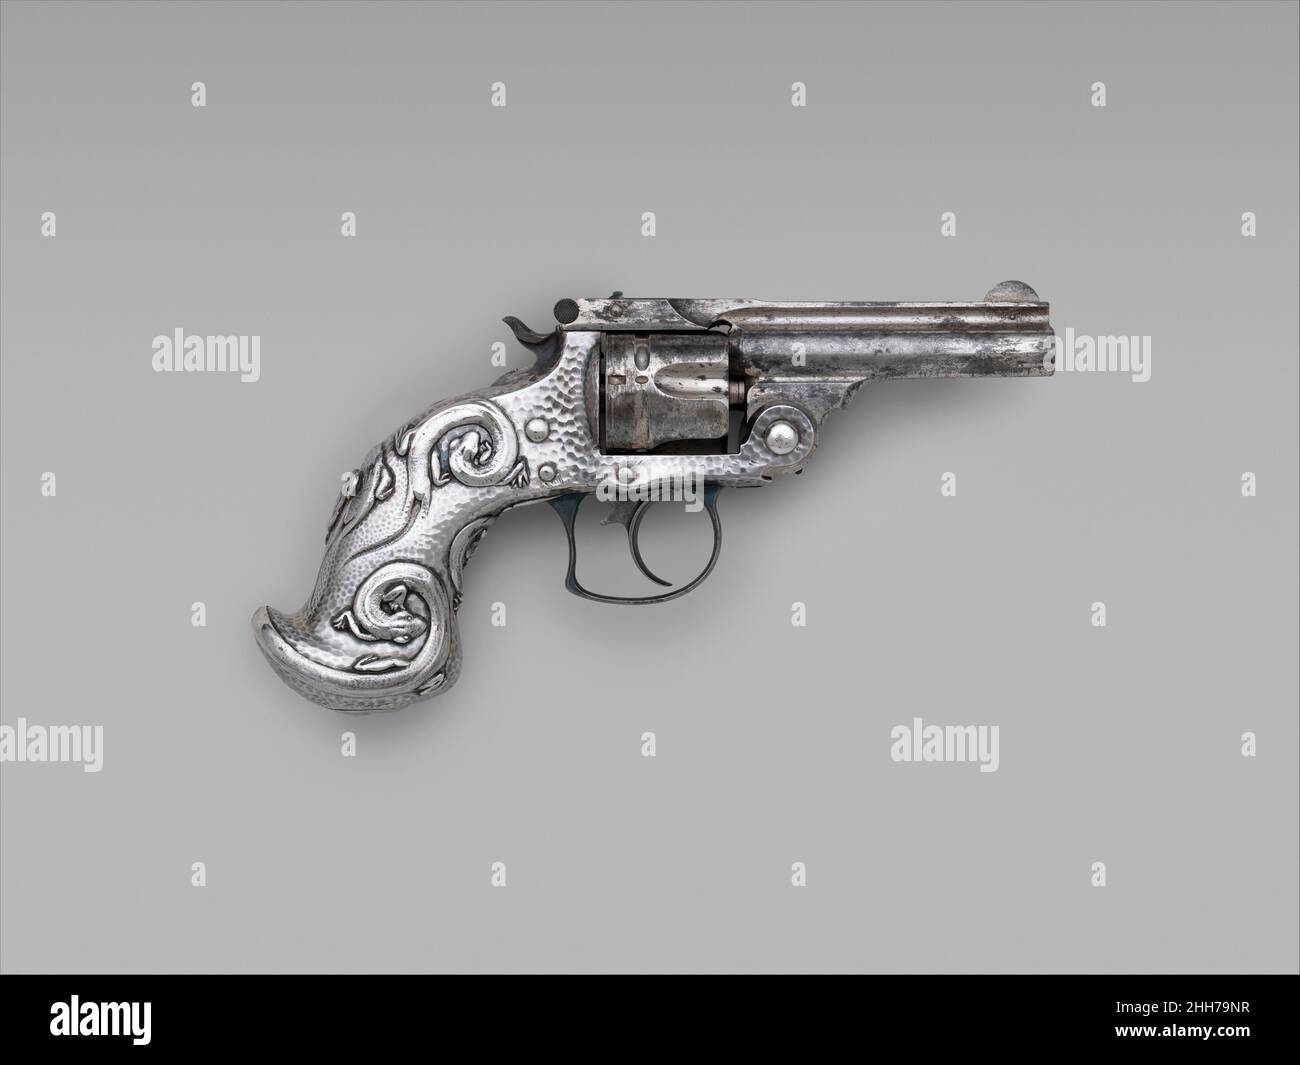 Smith and Wesson .38 Caliber Double-Action Revolver, serial no. 70002 1882–83 Smith & Wesson American The silver grip has a hammered surface popular in domestic silverware of the period. Its design reflects the elegant, whimsical style of Art Nouveau. The original design for the grip, dated 1883, is preserved in the Tiffany archives.. Smith and Wesson .38 Caliber Double-Action Revolver, serial no. 70002. American, Springfield, Massachusetts and New York. 1882–83. Steel, nickel, silver. Springfield, Massachusetts; New York, New York. Firearms-Pistols-Revolvers Stock Photo